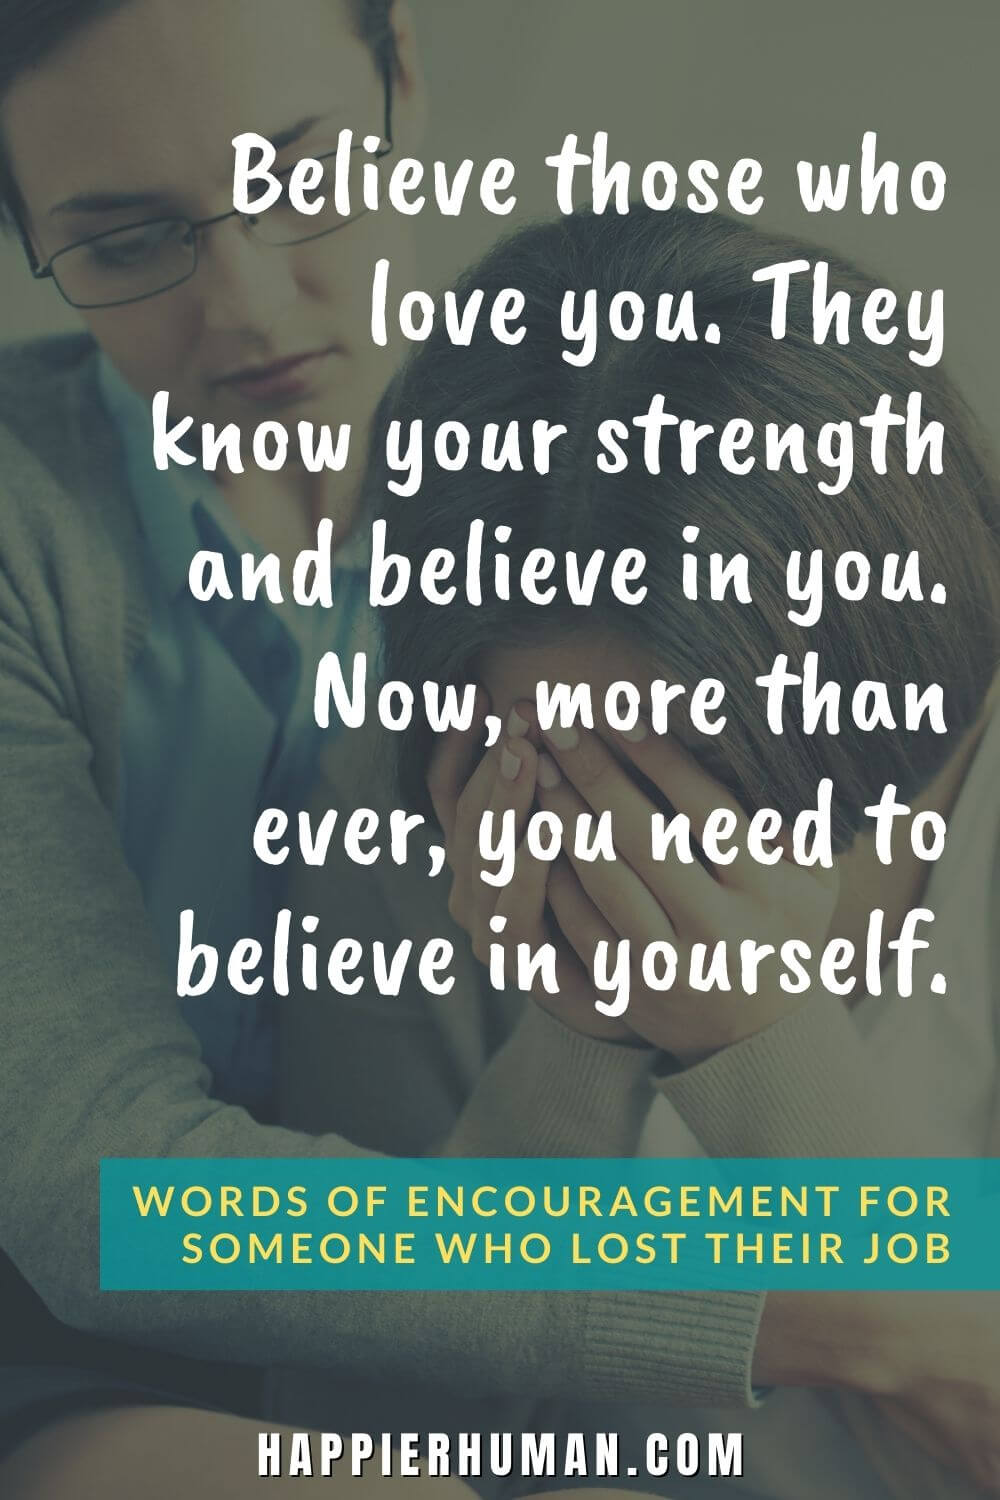 Words of Encouragement for Someone Who Lost Their Job - Believe those who love you. They know your strength and believe in you. Now, more than ever, you need to believe in yourself. | how to encourage a friend who lost his job | how to comfort a man who lost his job | what not to say to someone who lost their job